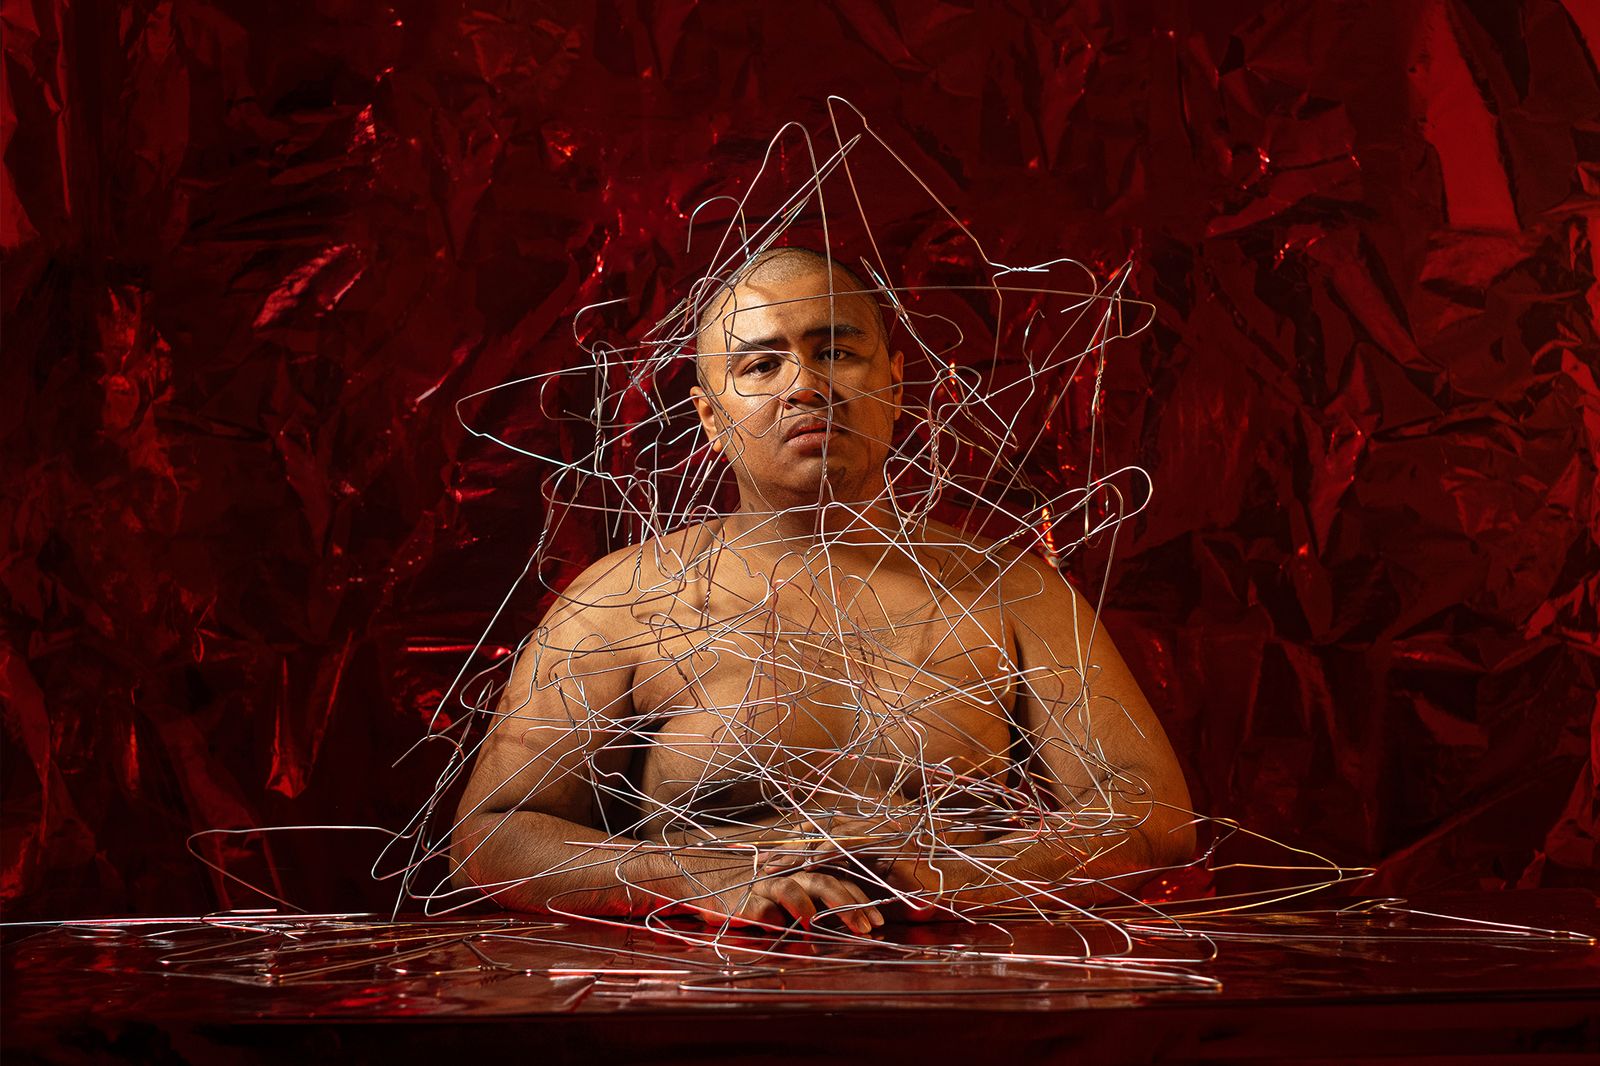 © Arjuna Asa - Image from the How Does It Feel Like to Be A Fat Person? photography project